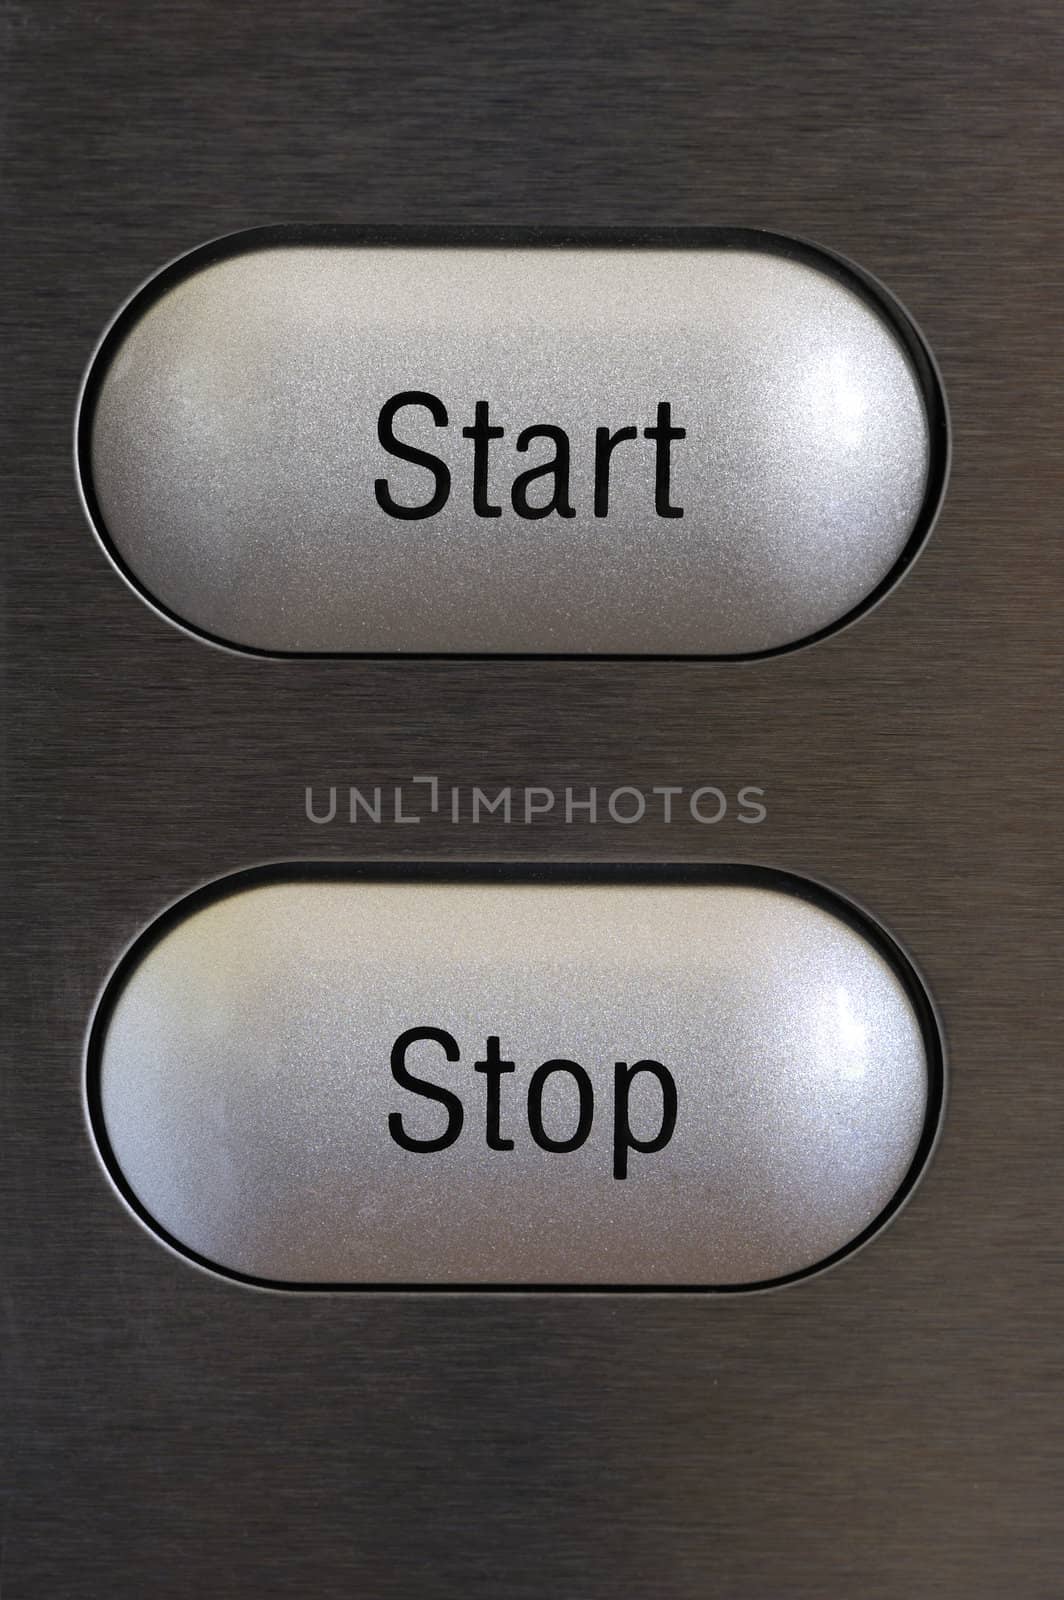 Stop and start buttons on a textured grey background.
